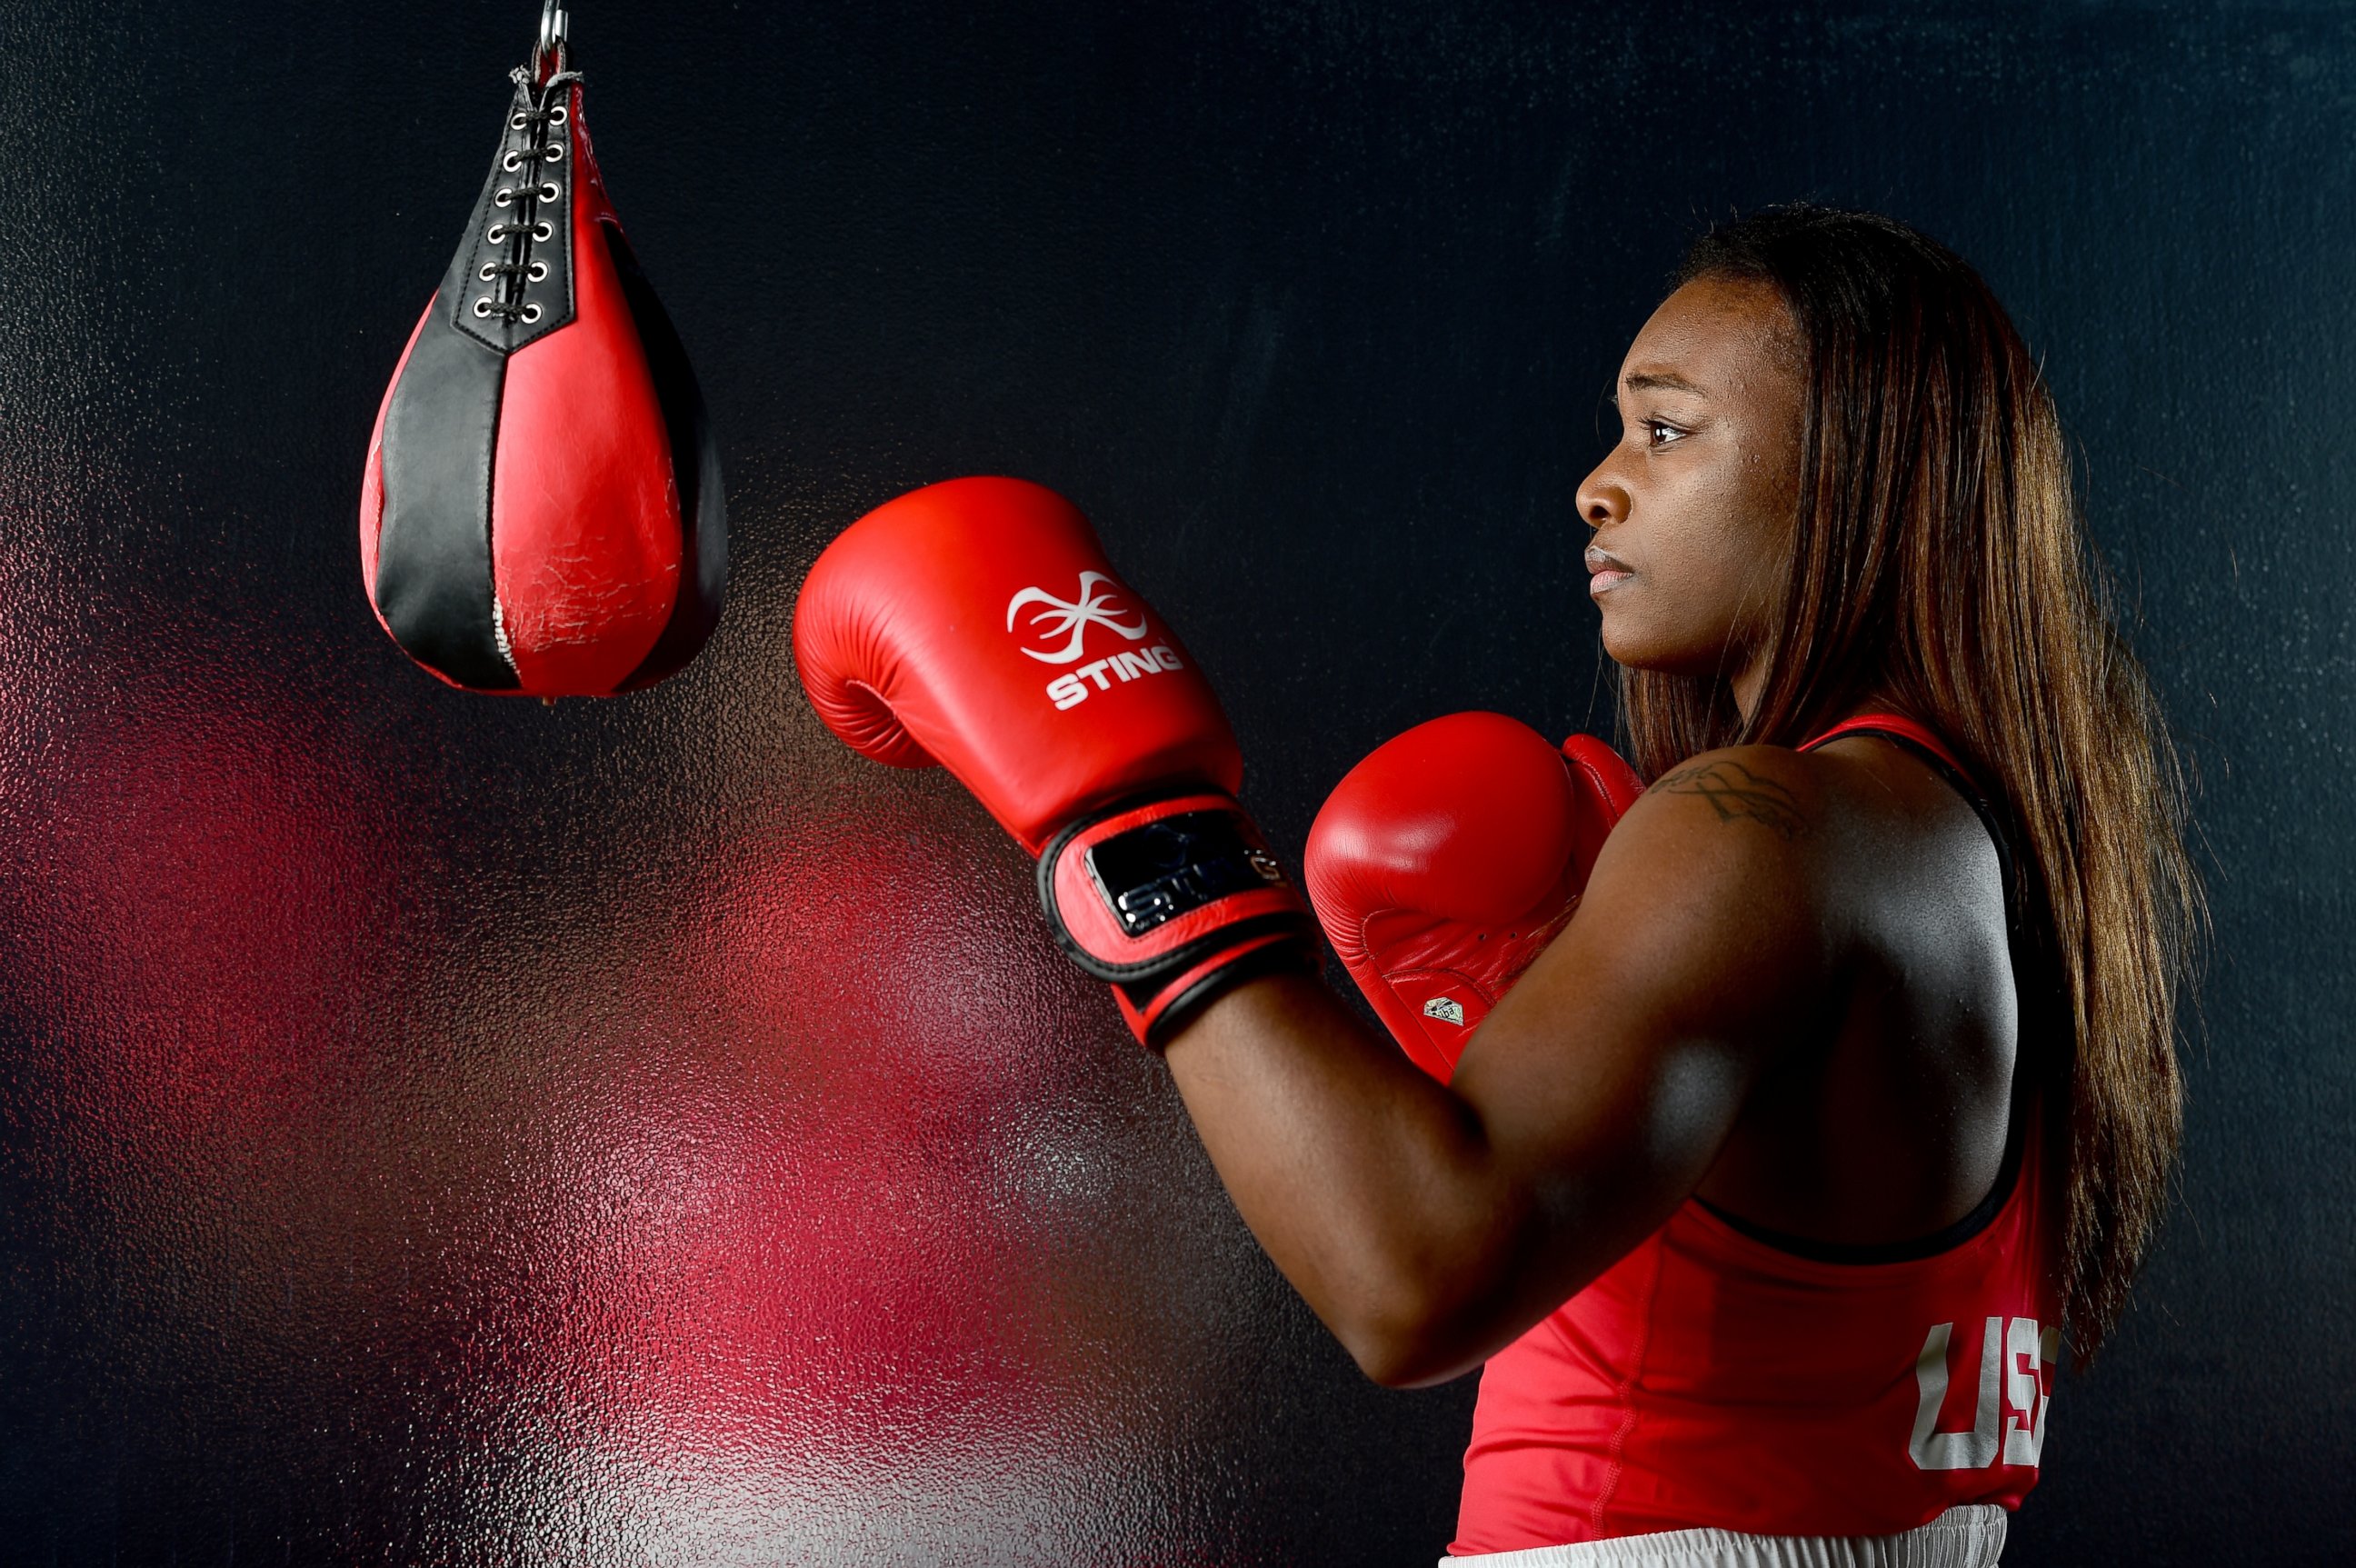 PHOTO: Boxer Claressa Shields poses for a portrait at the USOC Rio Olympics Shoot at Quixote Studios, on Nov. 19, 2015, in Los Angeles.